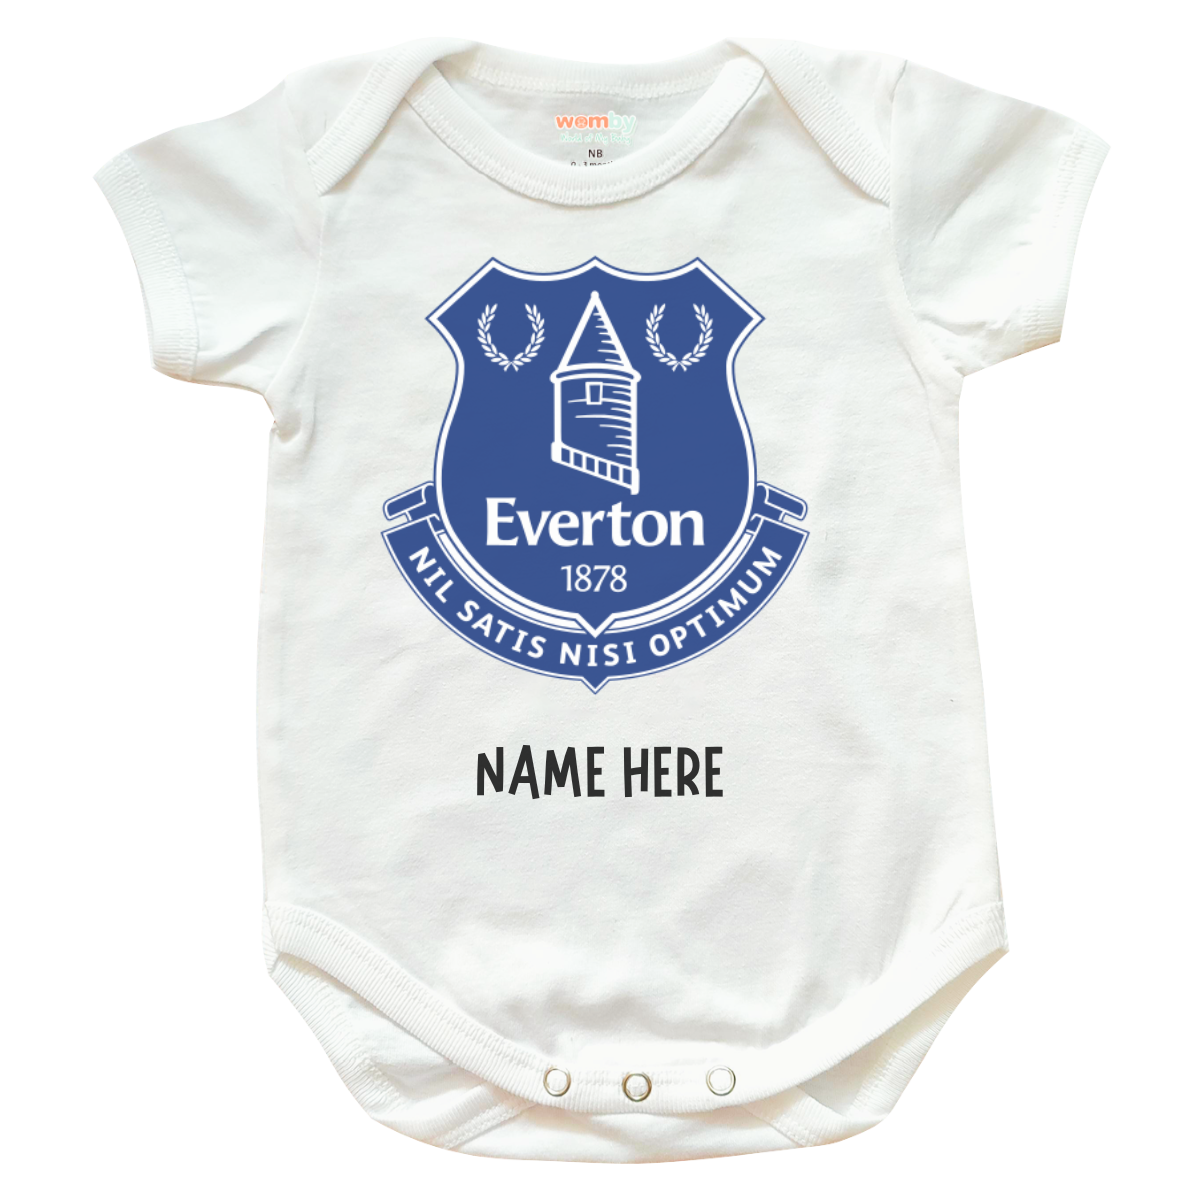 Everton Football Team Baby Rompers - White